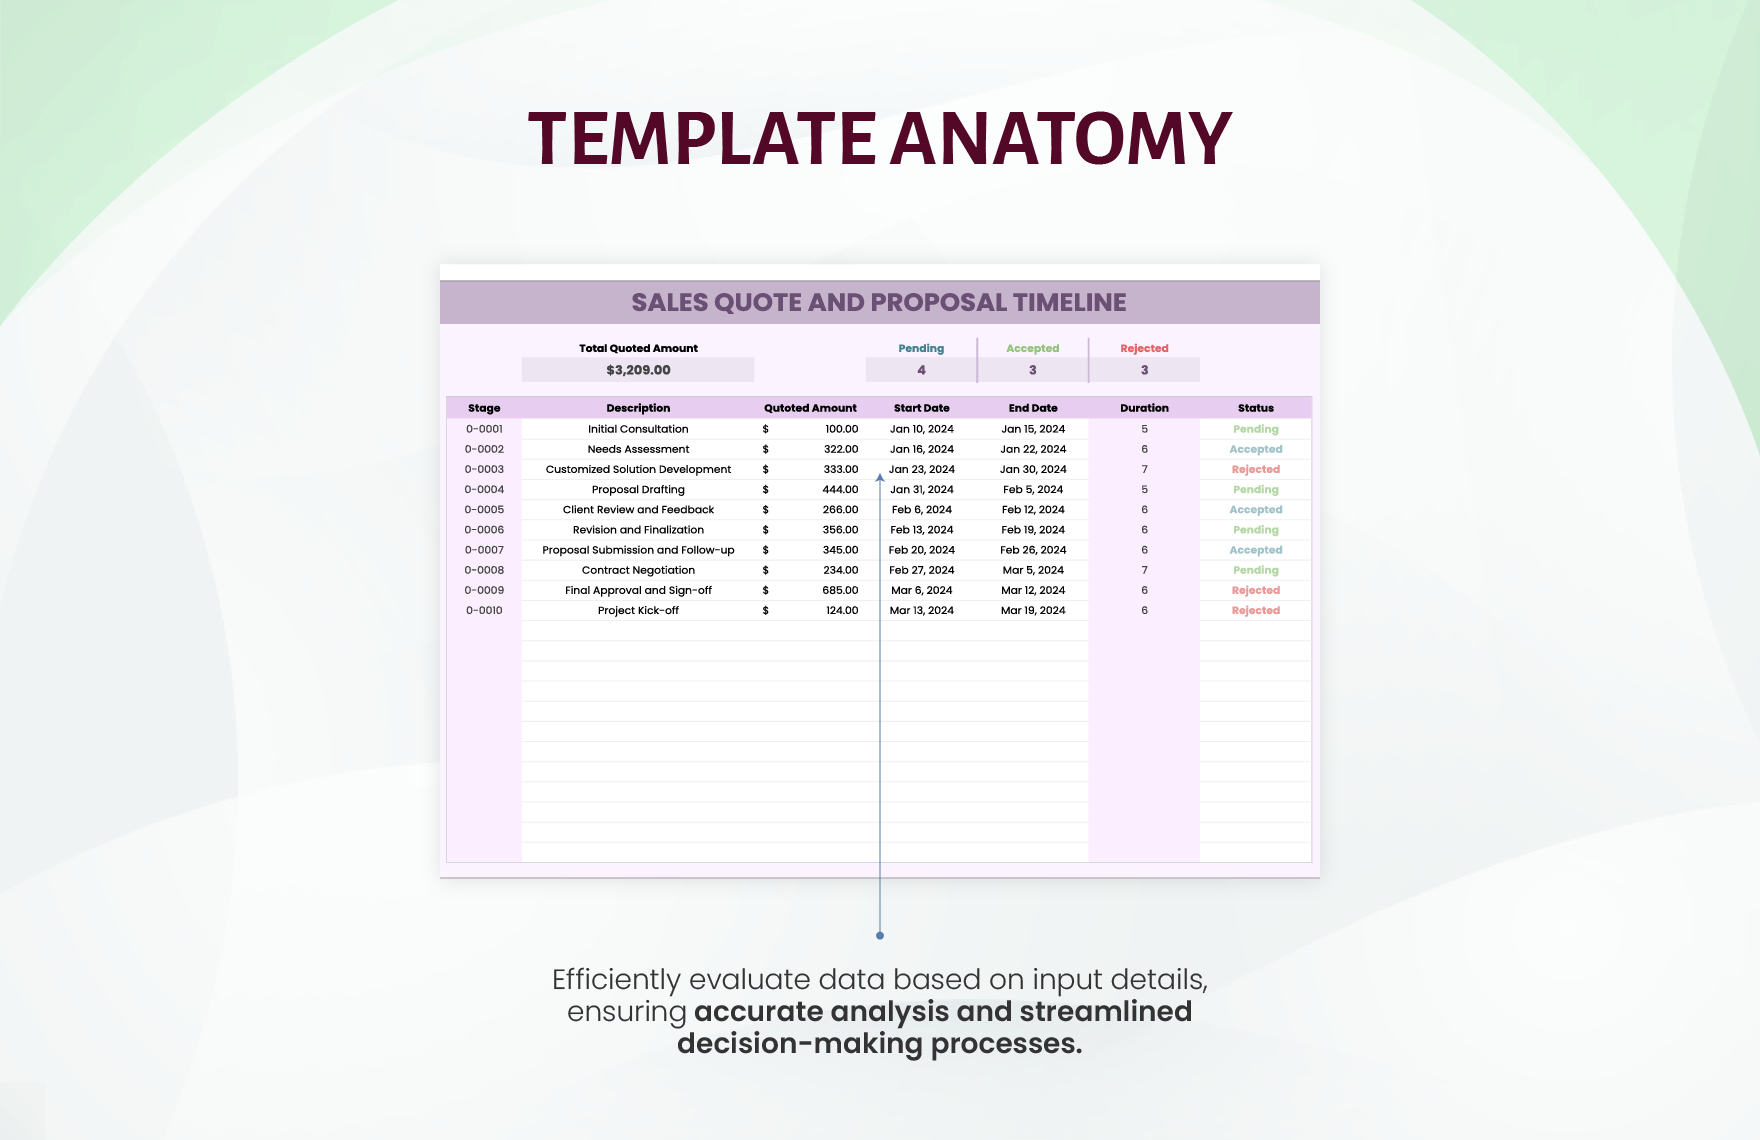 Sales Quote and Proposal Timeline Template